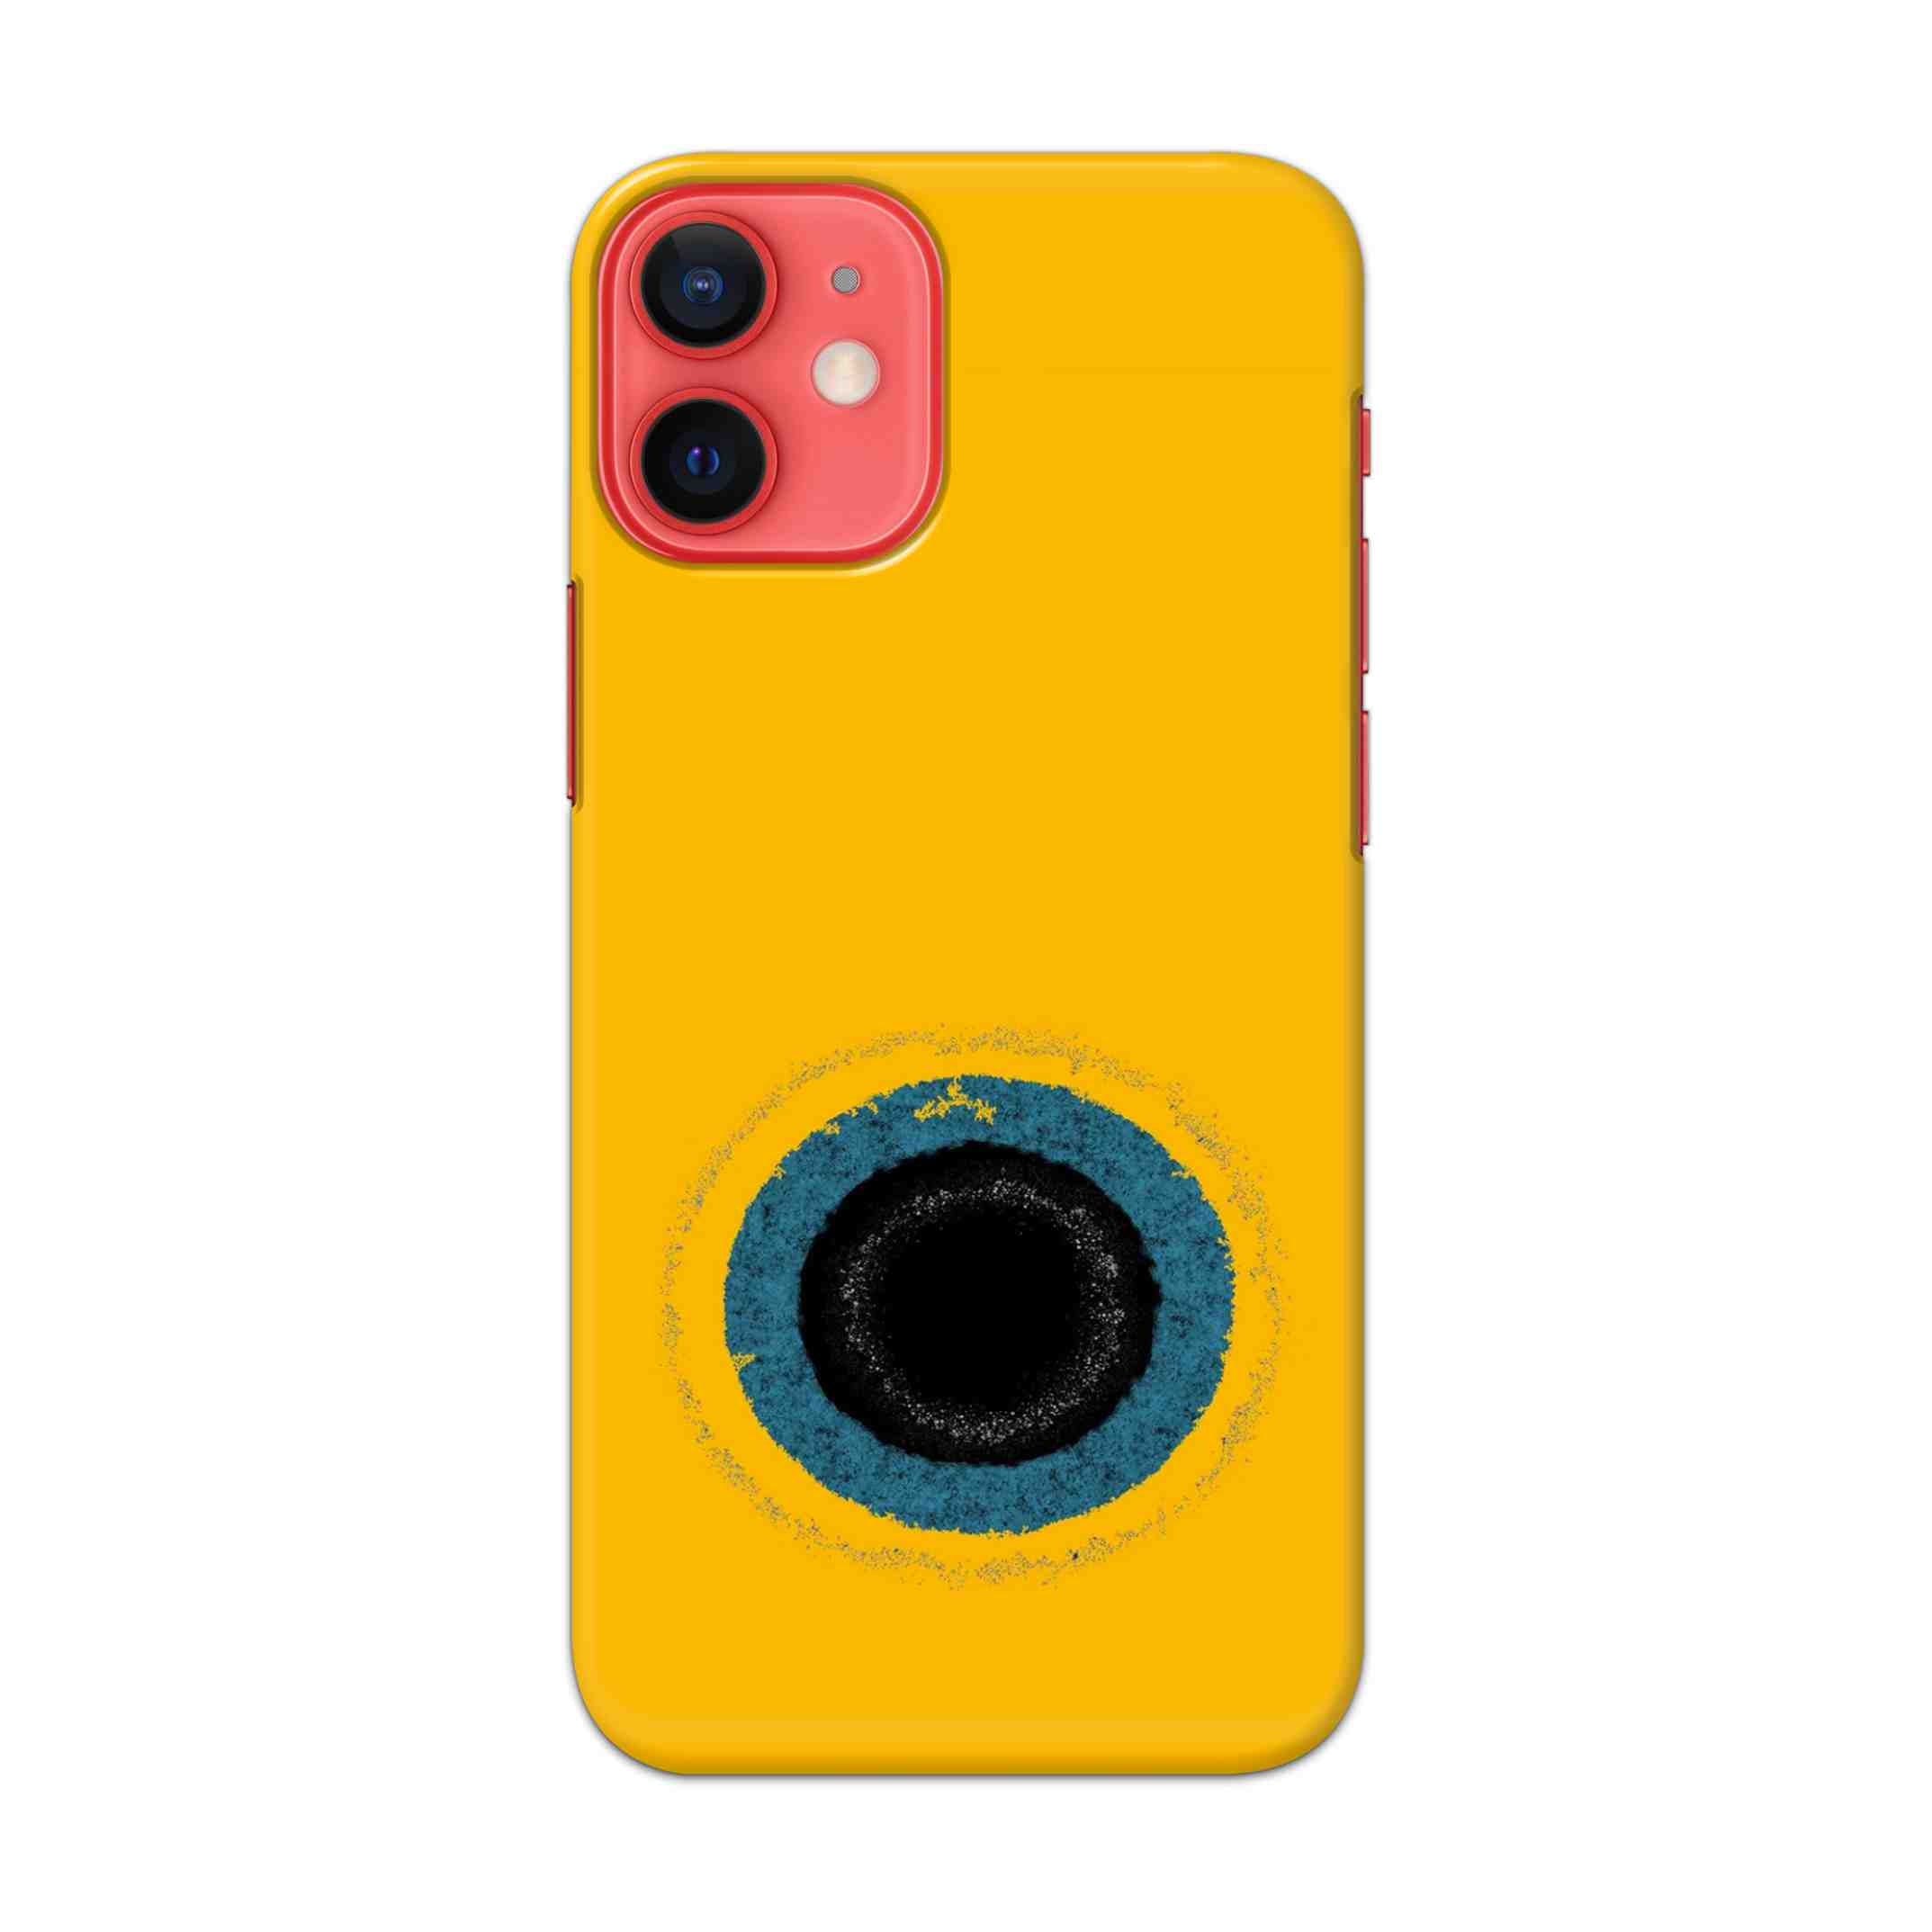 Buy Dark Hole With Yellow Background Hard Back Mobile Phone Case/Cover For Apple iPhone 12 mini Online